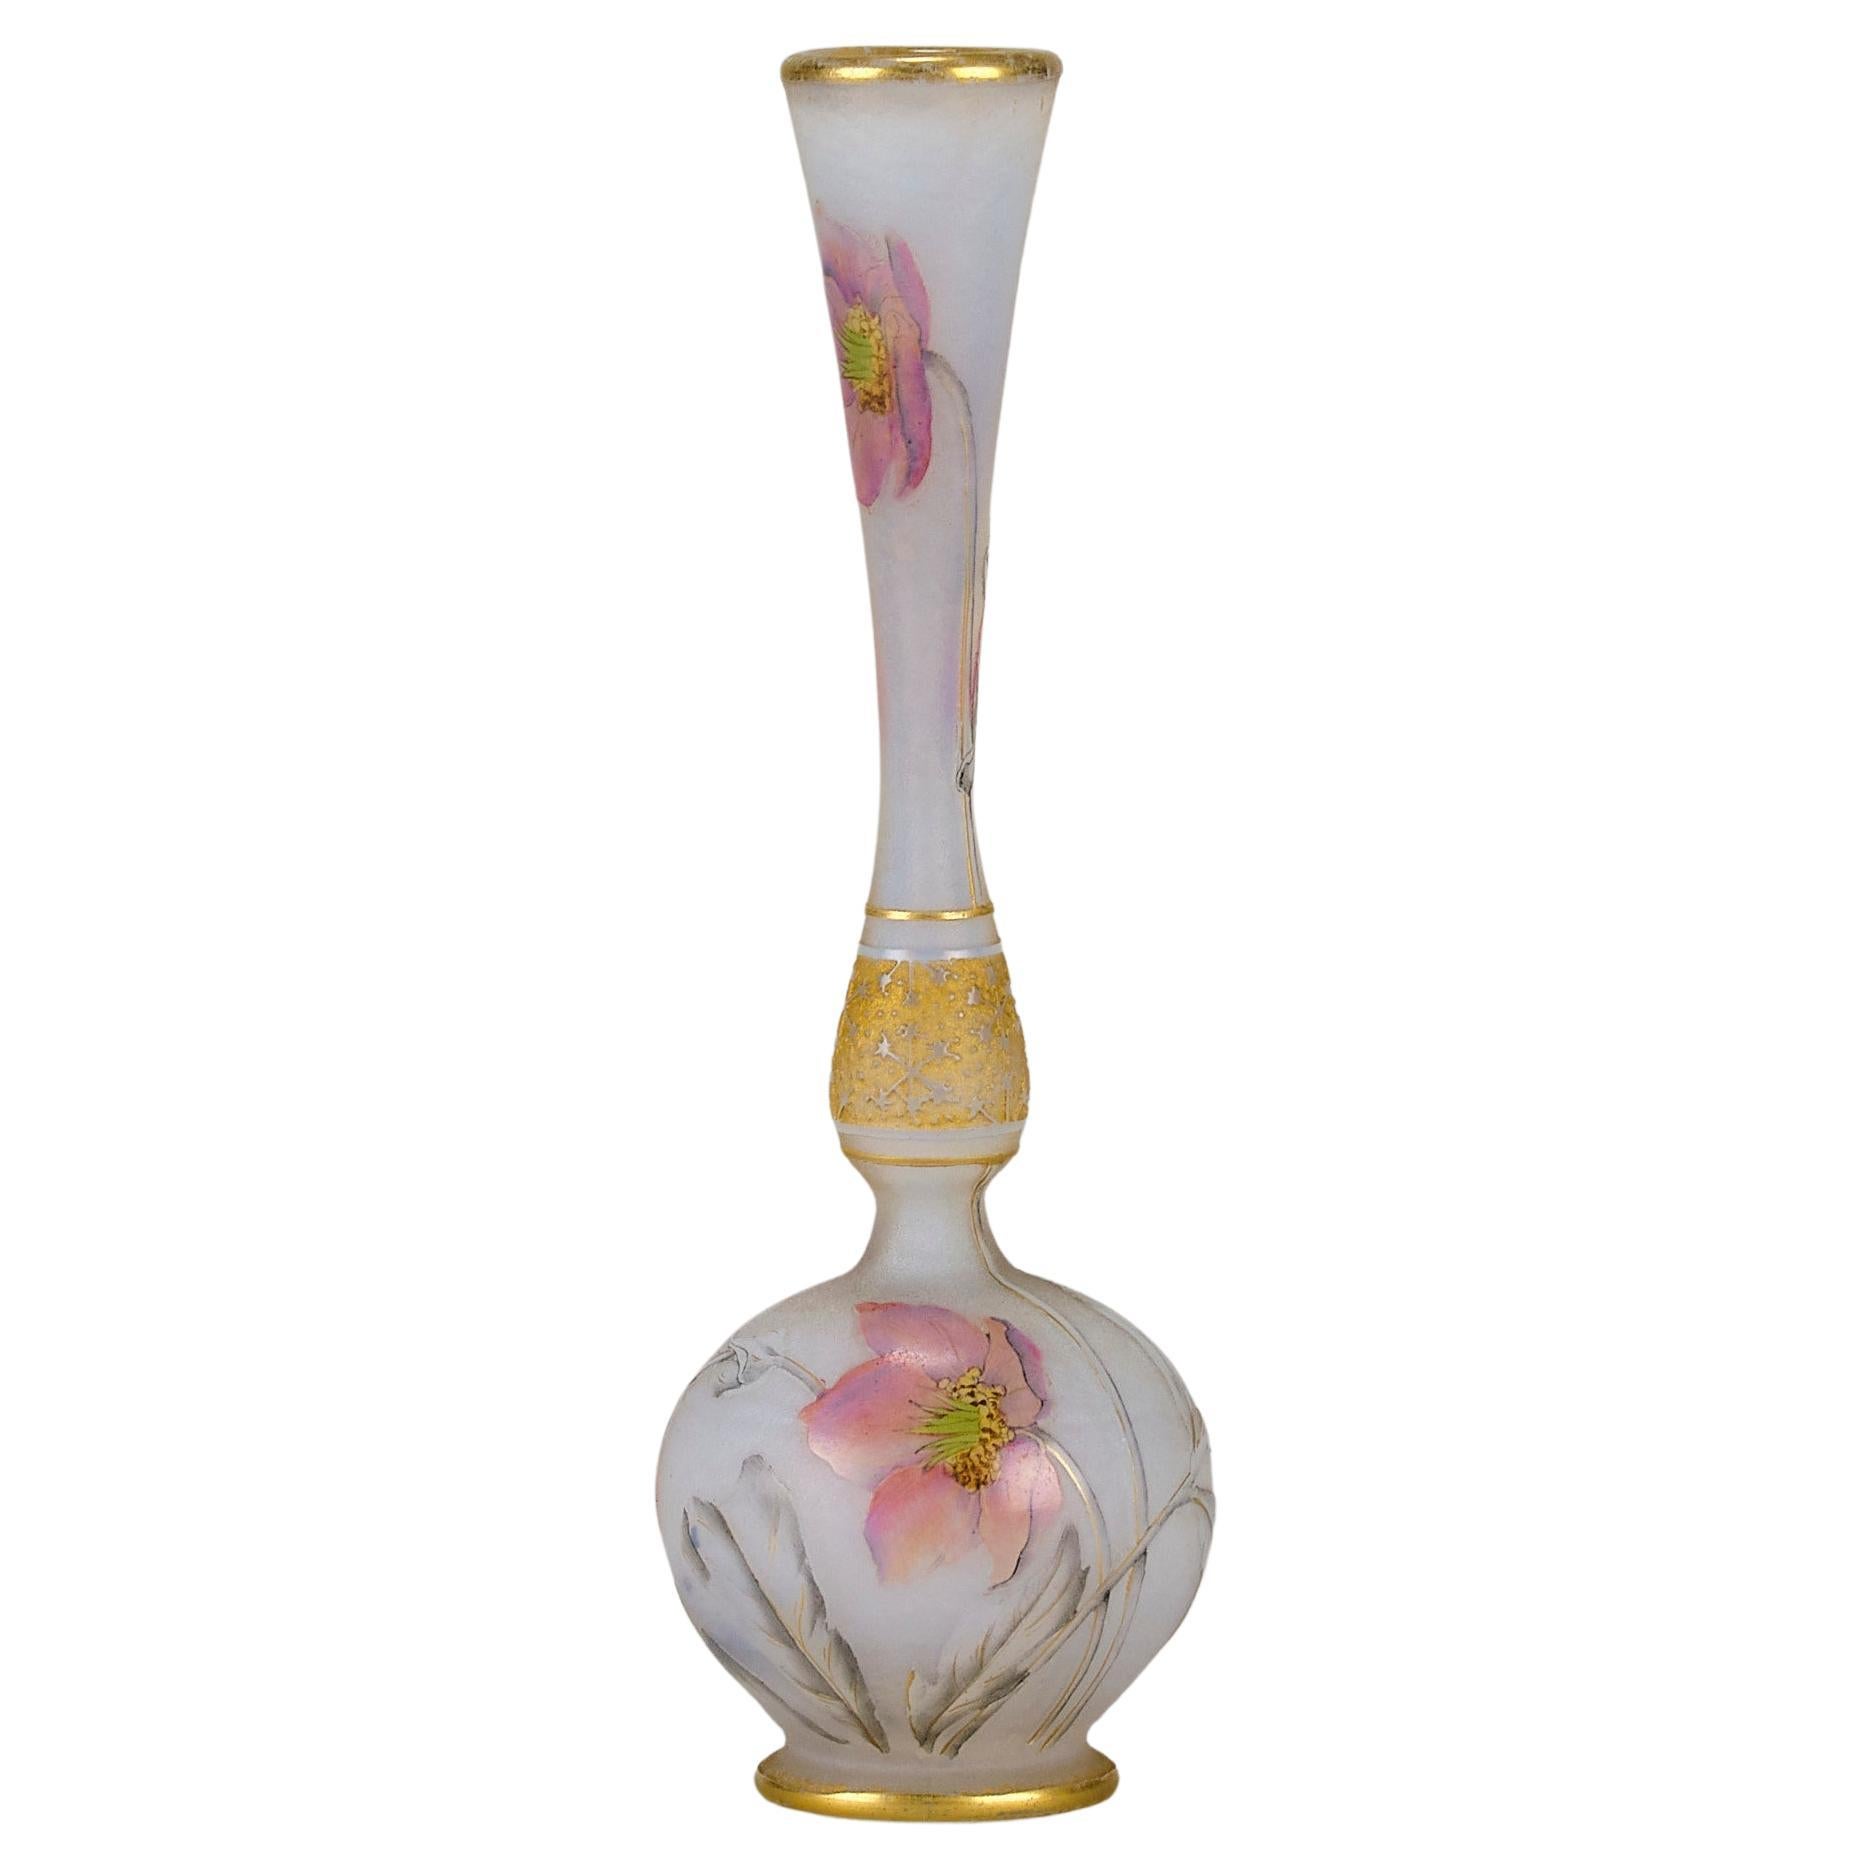 Early 20th Century Cameo Glass Vase entitled "Hellebore Vase" by Daum Frères For Sale